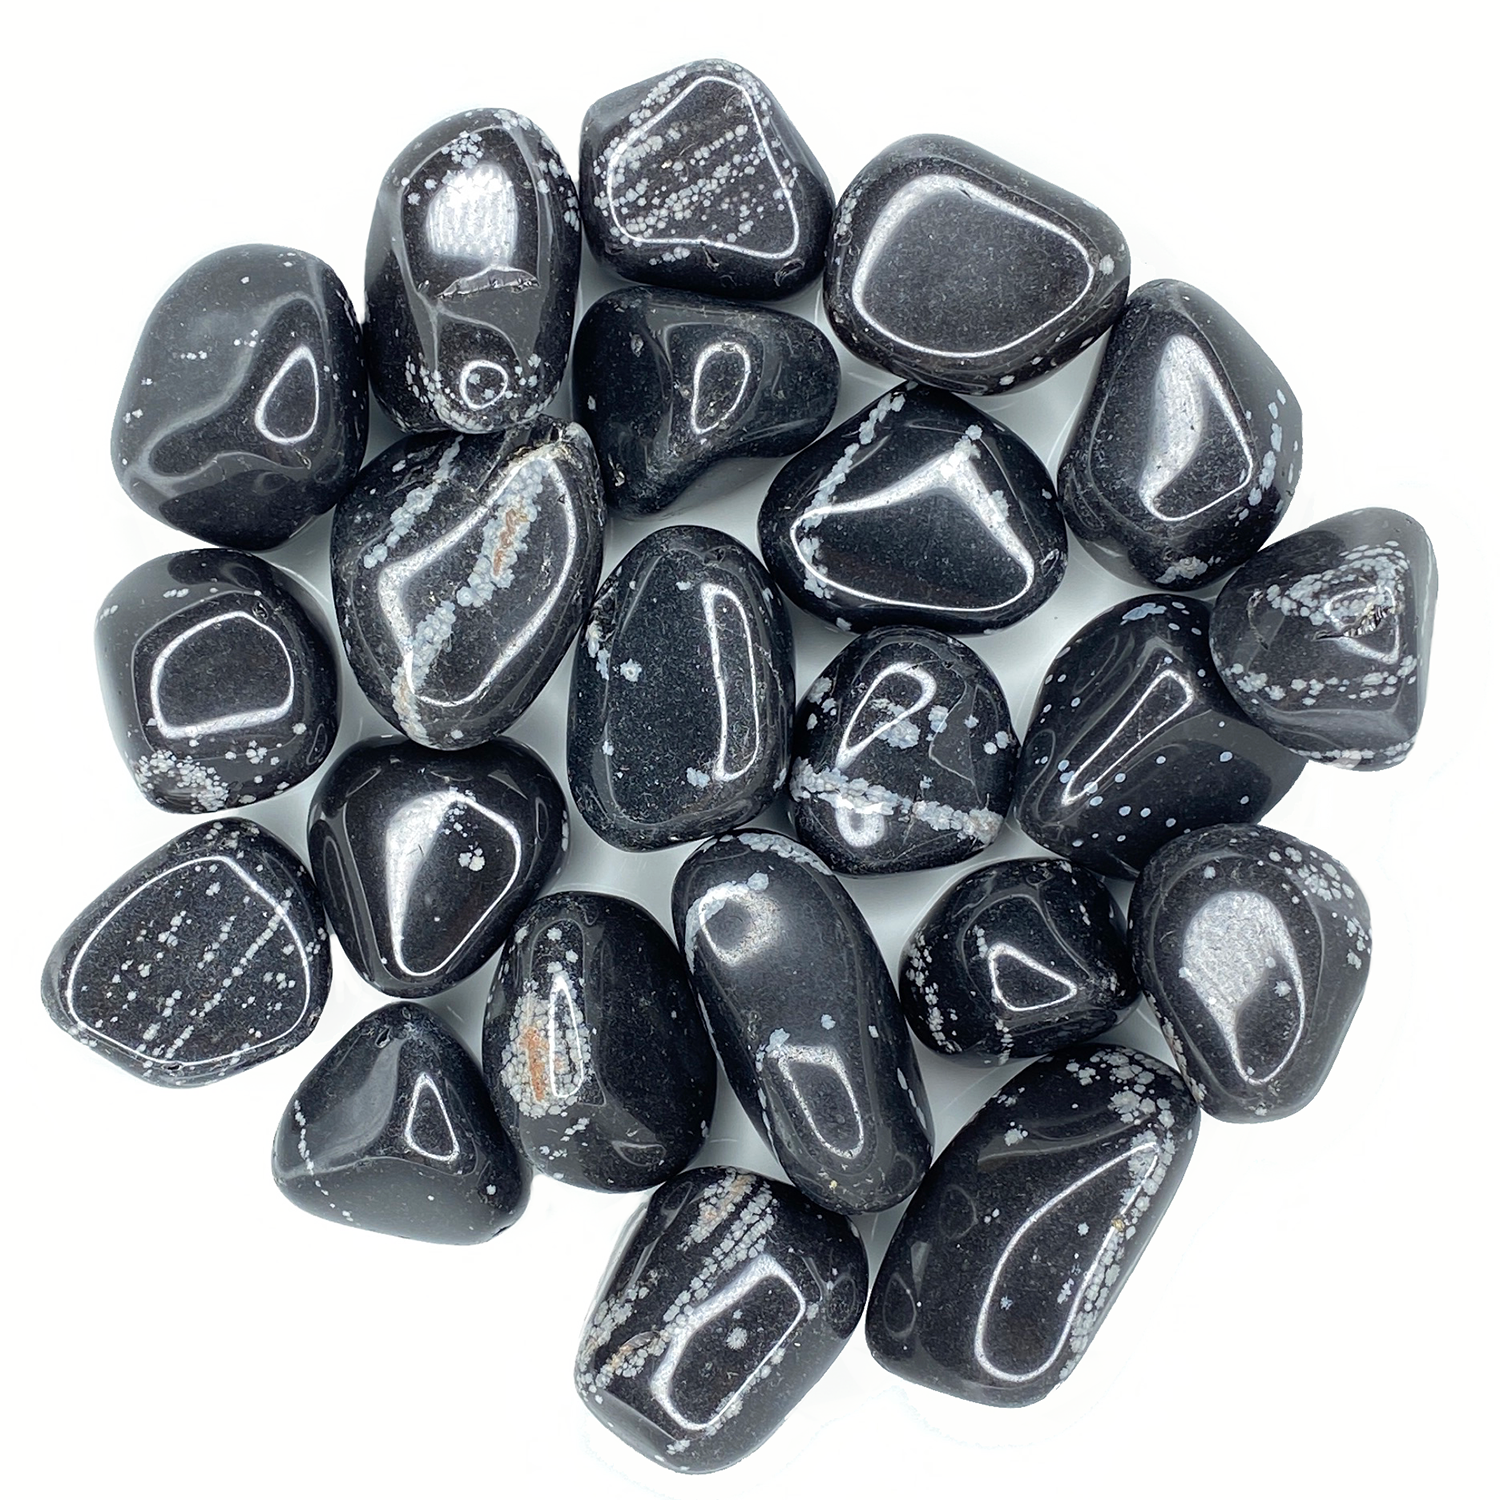 Bulk Tumbled Stone - Large - Black Obsidian from South Africa